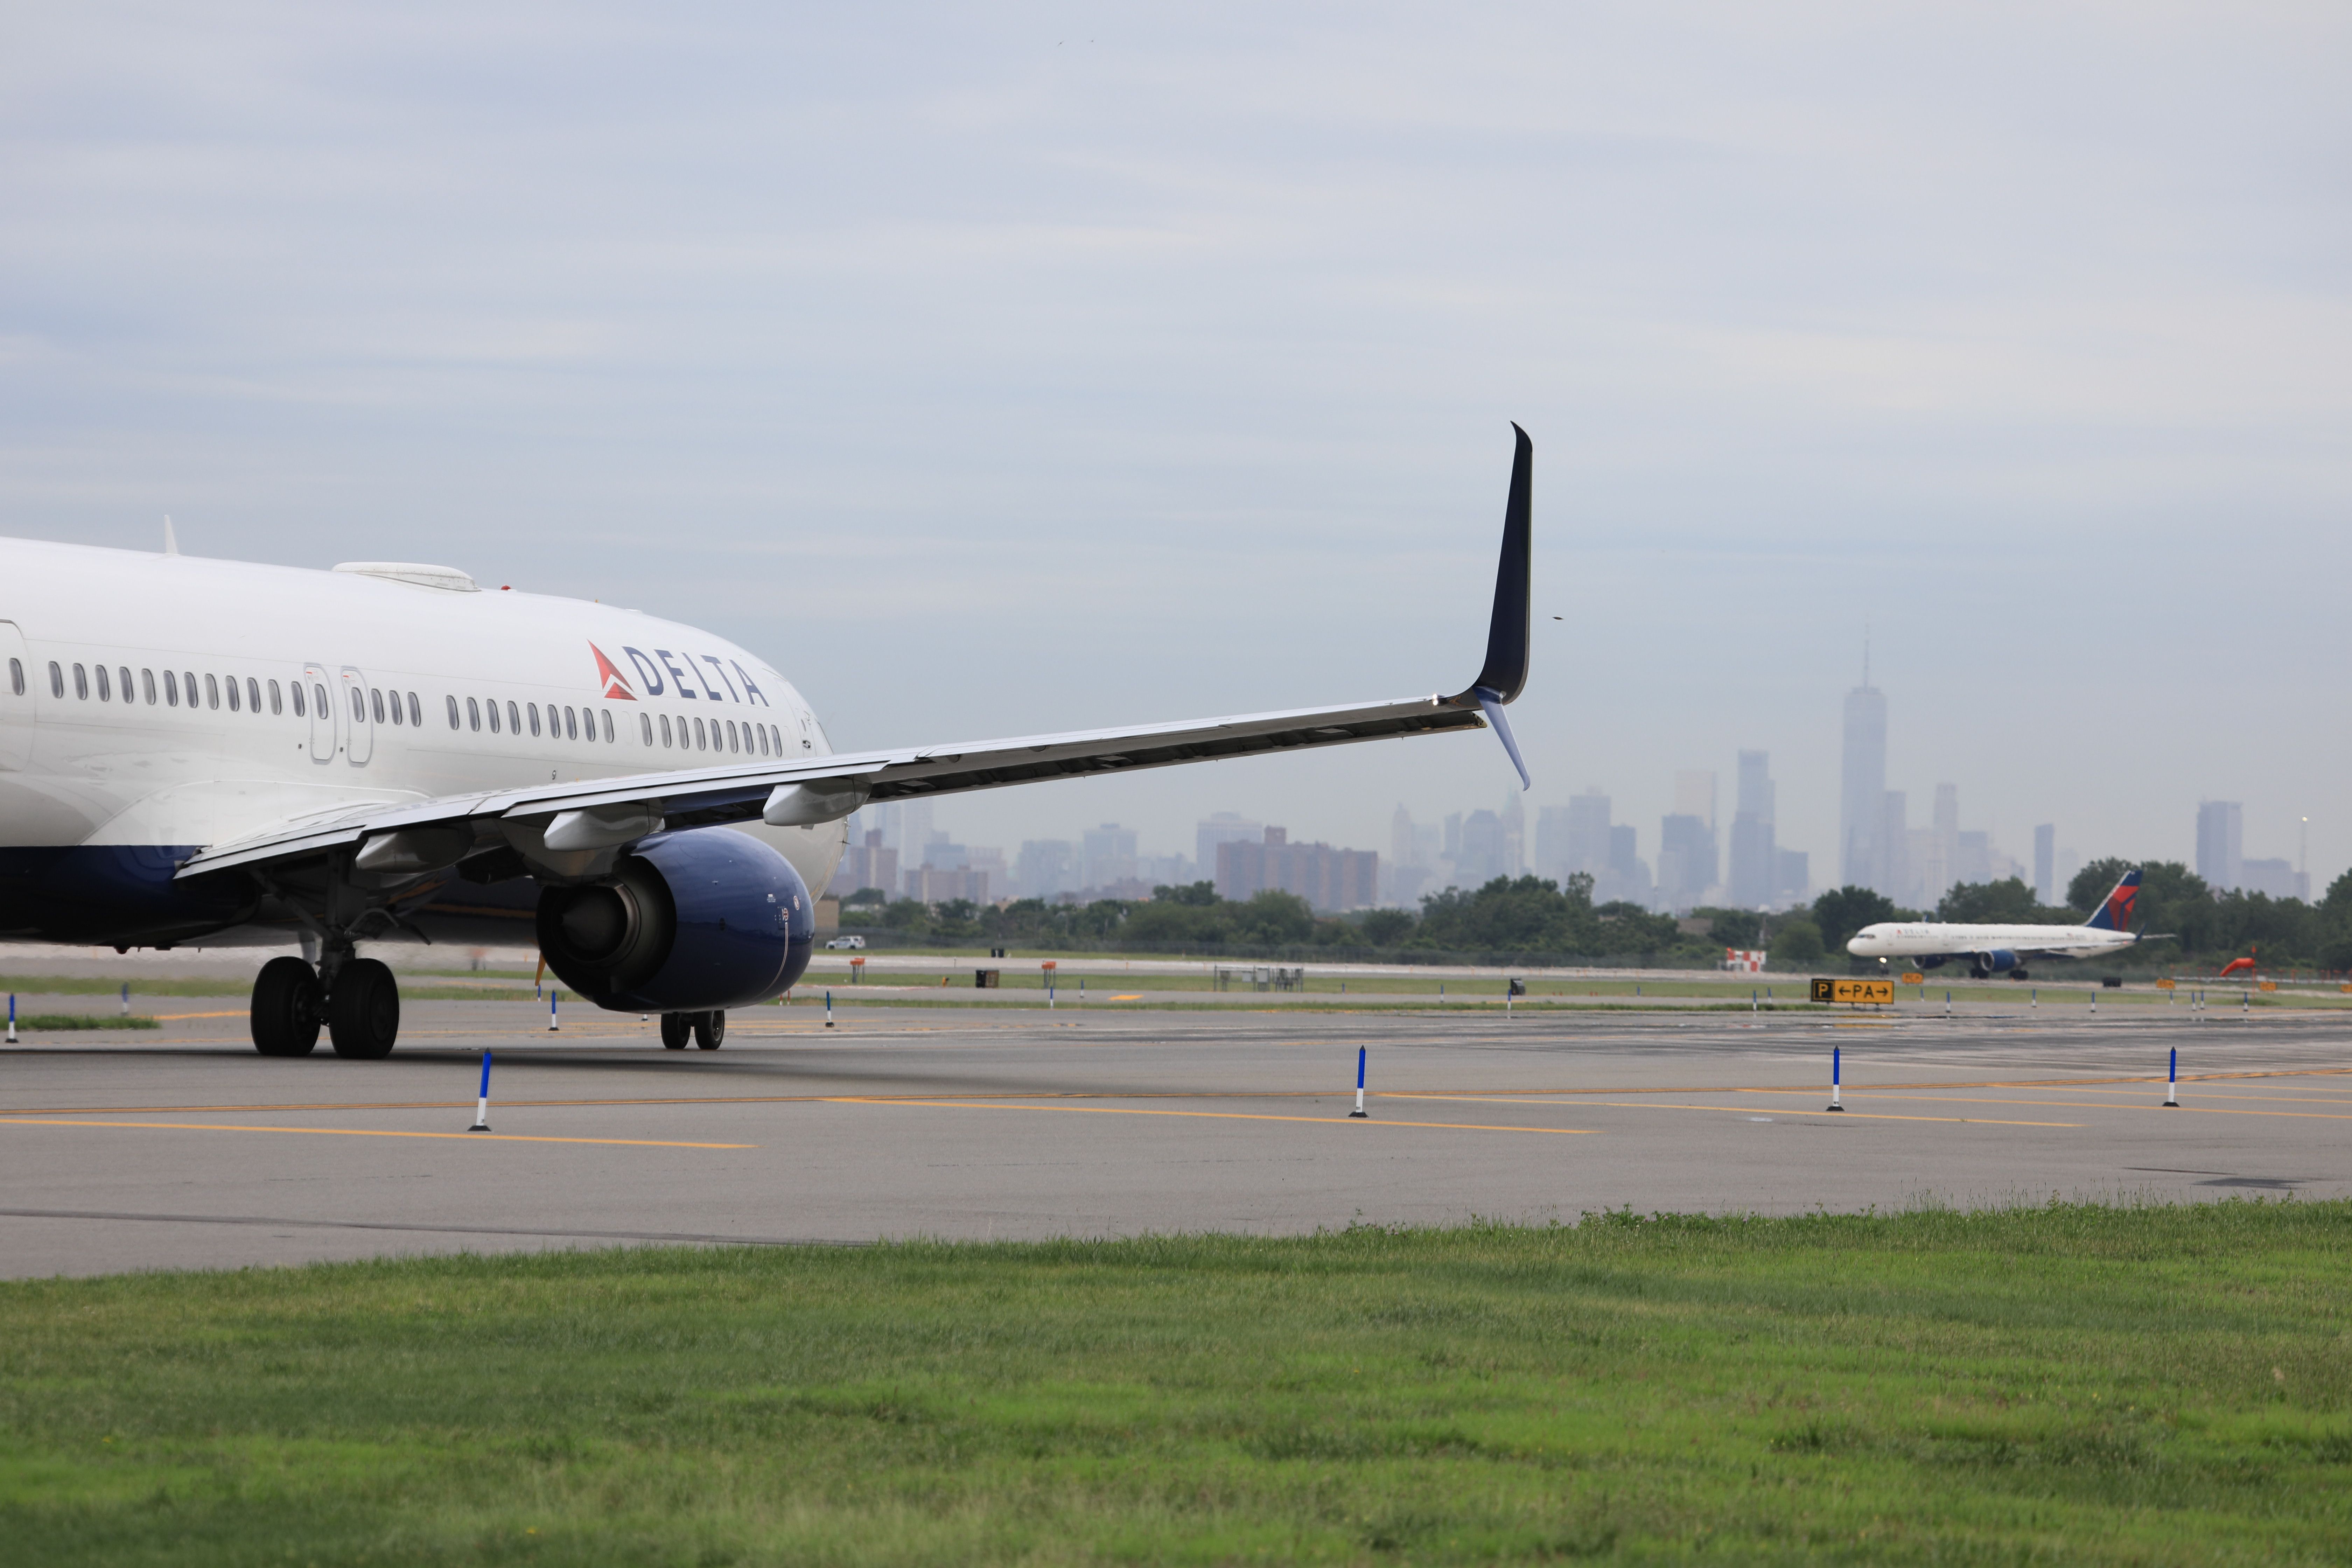 Delta aircraft at JFK with the New York Skyline